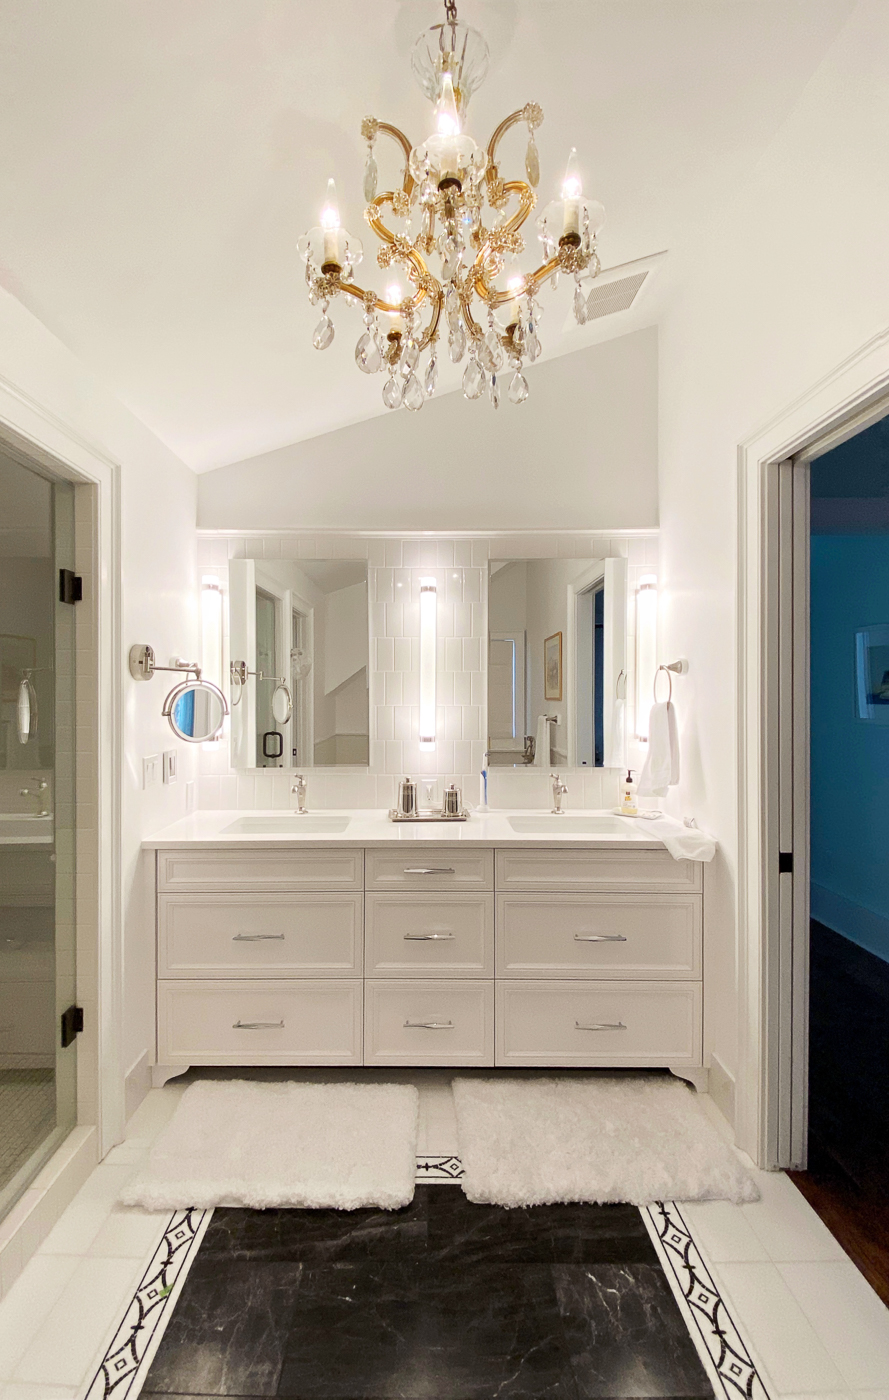 Remodeled bathroom with chandelier and custom marble and fasos tile floor